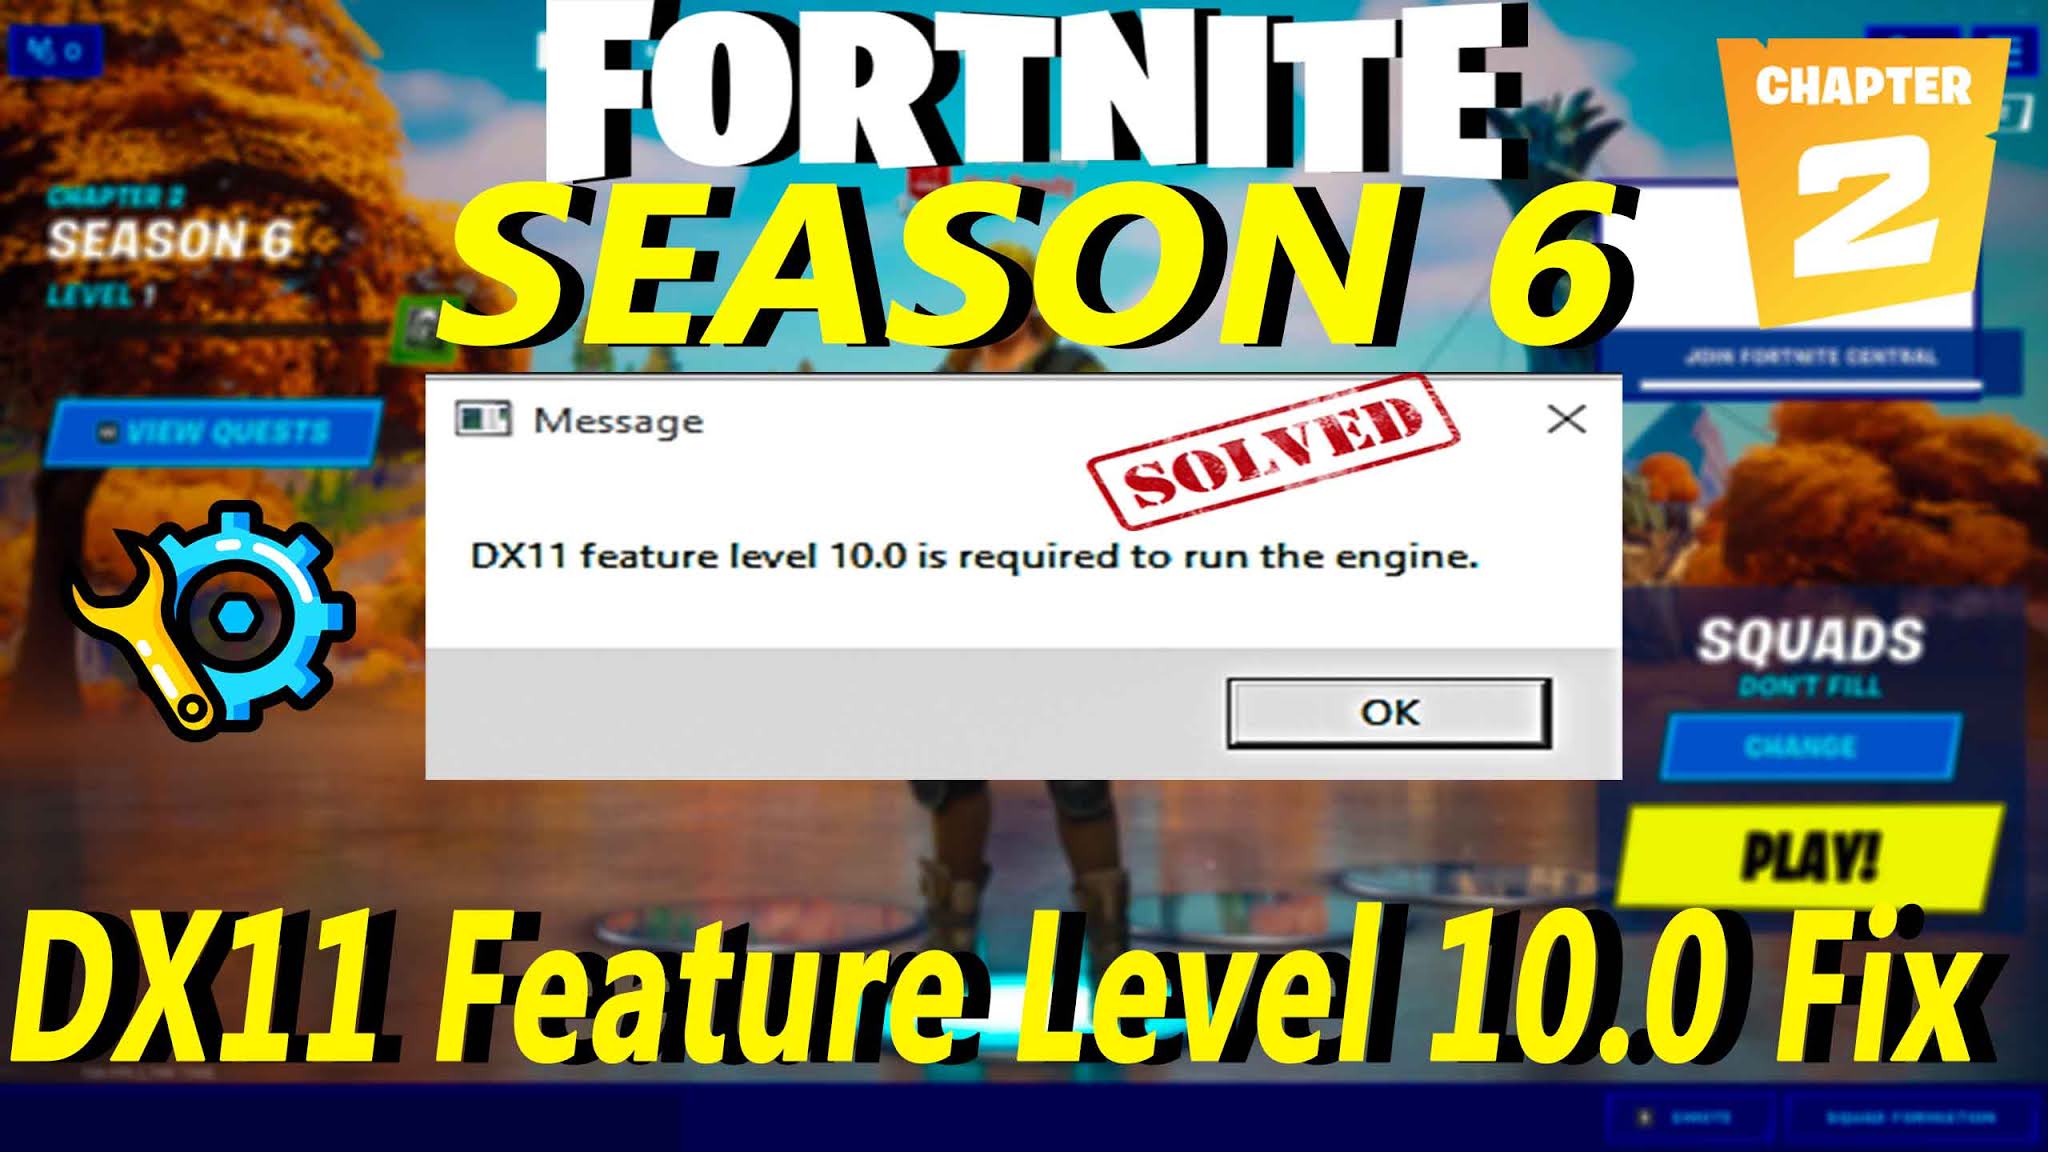 Dx11 feature level. Dx11 feature Level 10.0 is required to Run the engine как исправить. Dx11 feature Level 10.0 is required to Run the engine. Message dx11 feature Level 100 is required to Run the engine что за ошибка.